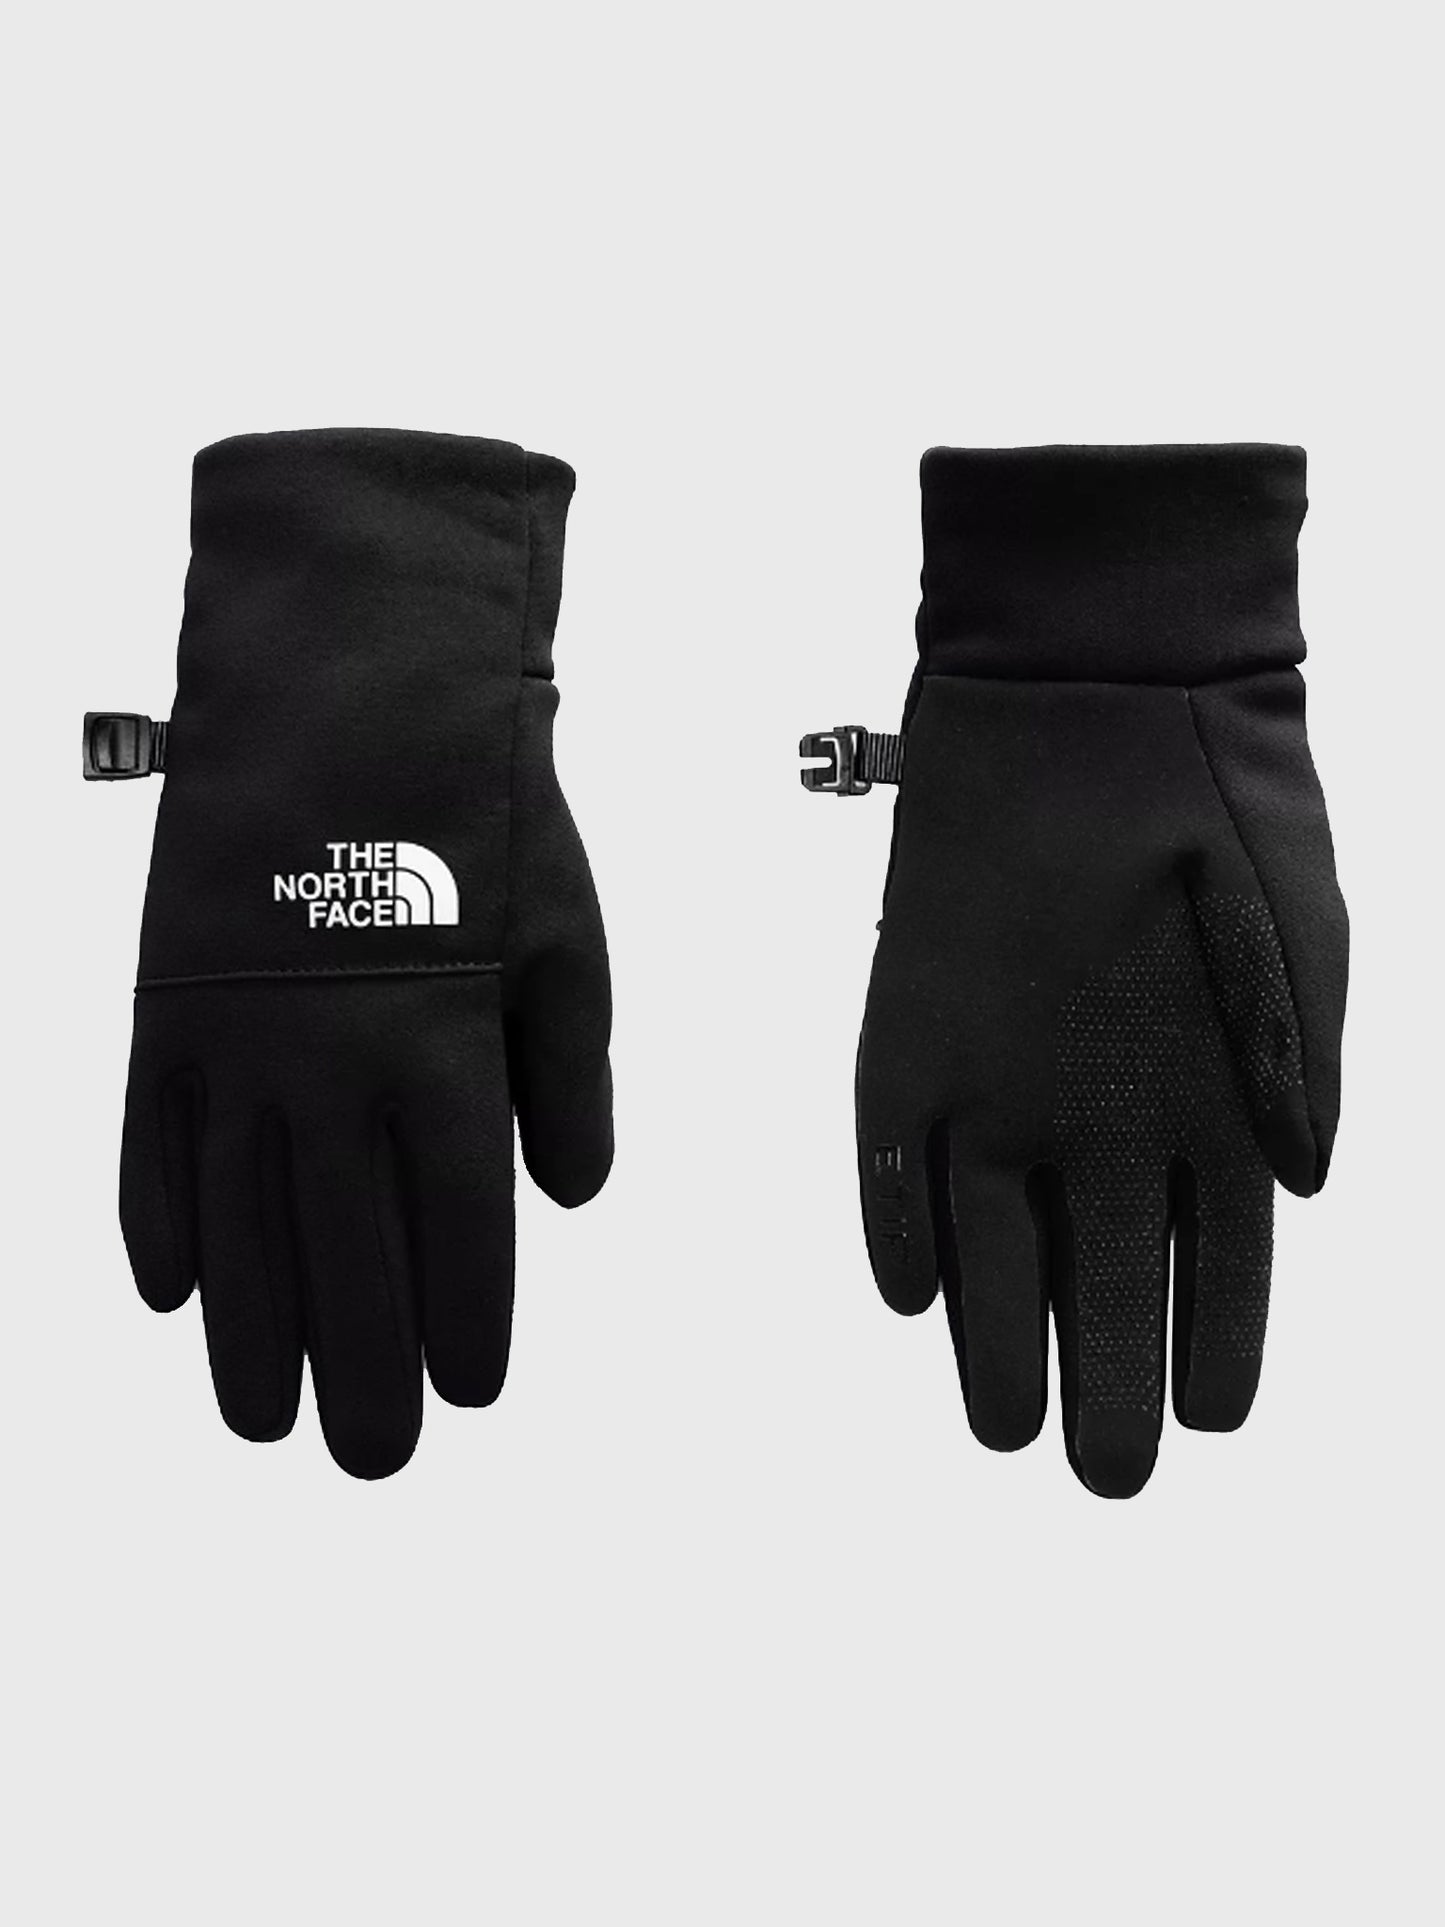 The North Face Youth Recycled Etip™ Glove